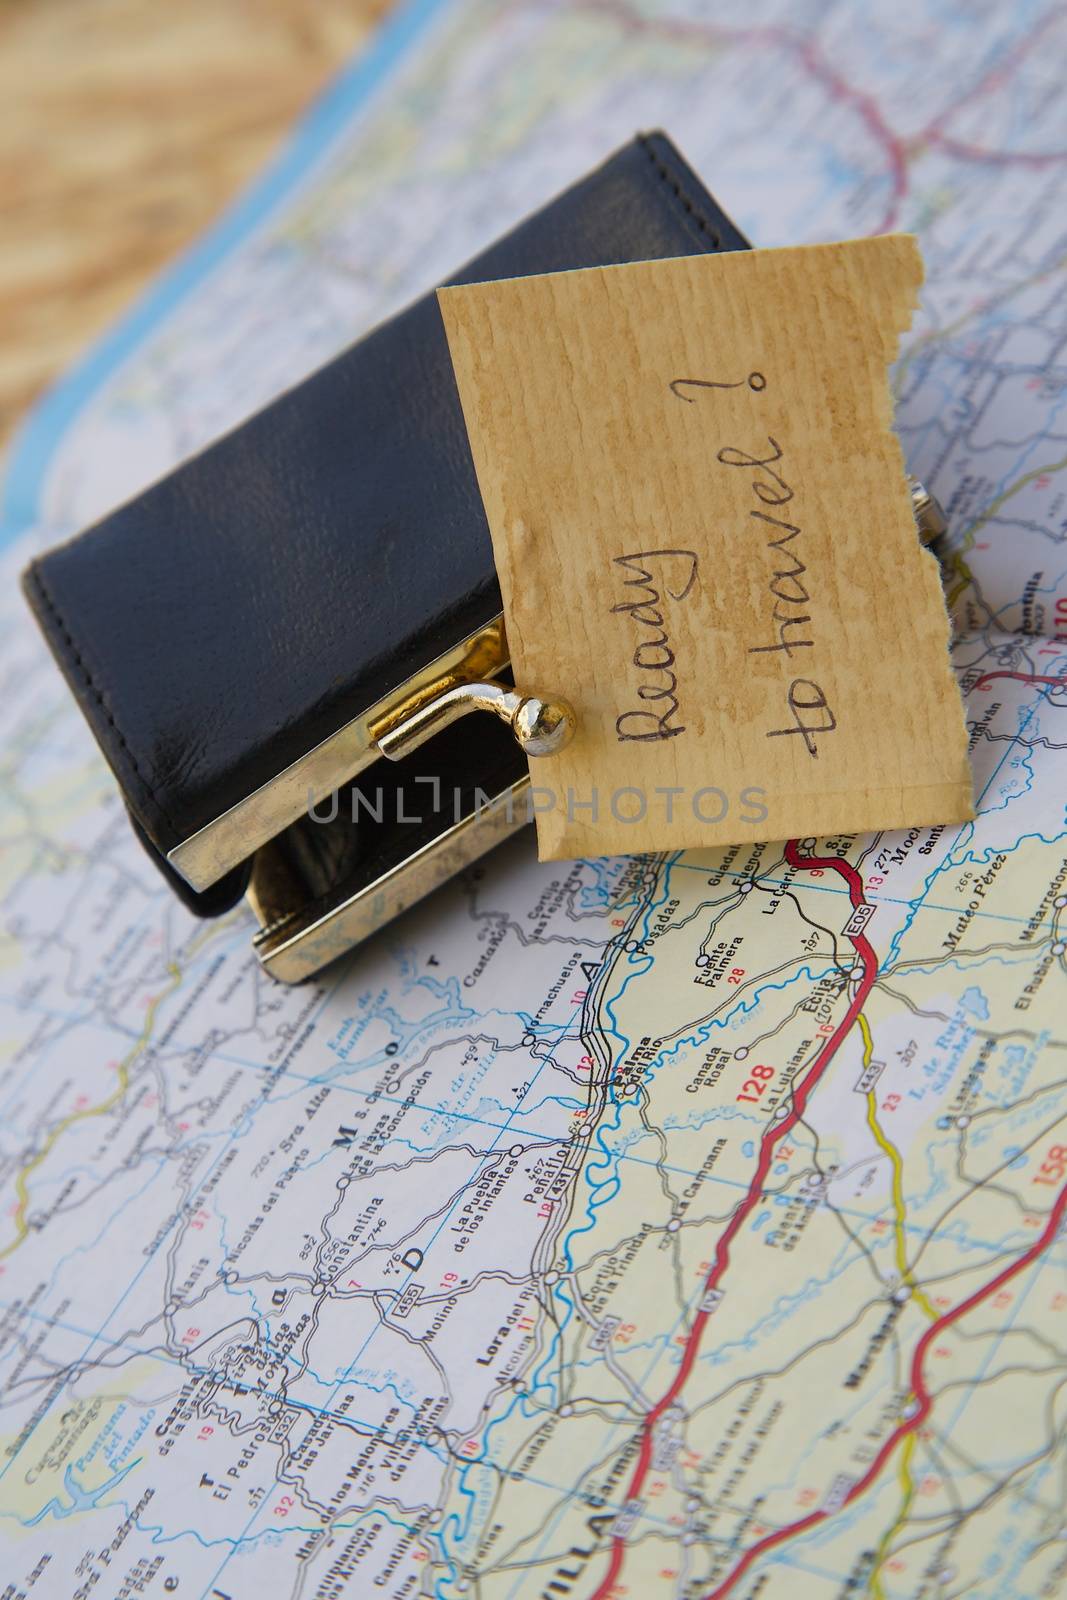 Message left at a small wallet:"Ready to travel?" Items are placed on the road map